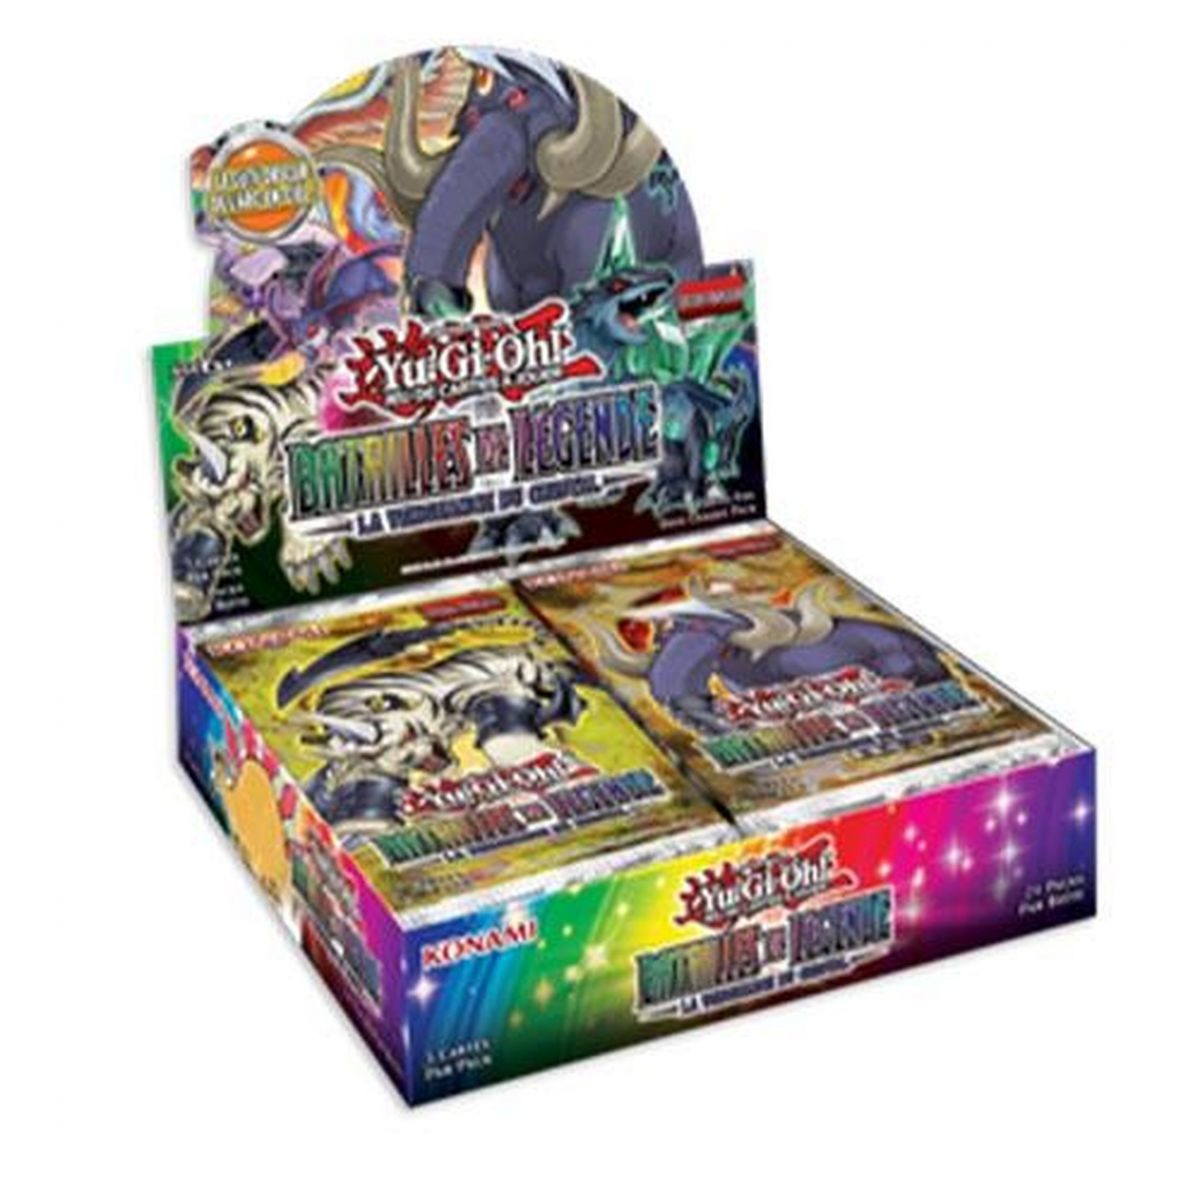 Item Yu Gi Oh! - Display - Box of 24 Boosters - Legendary Battles: Revenge of the Crystal - FR